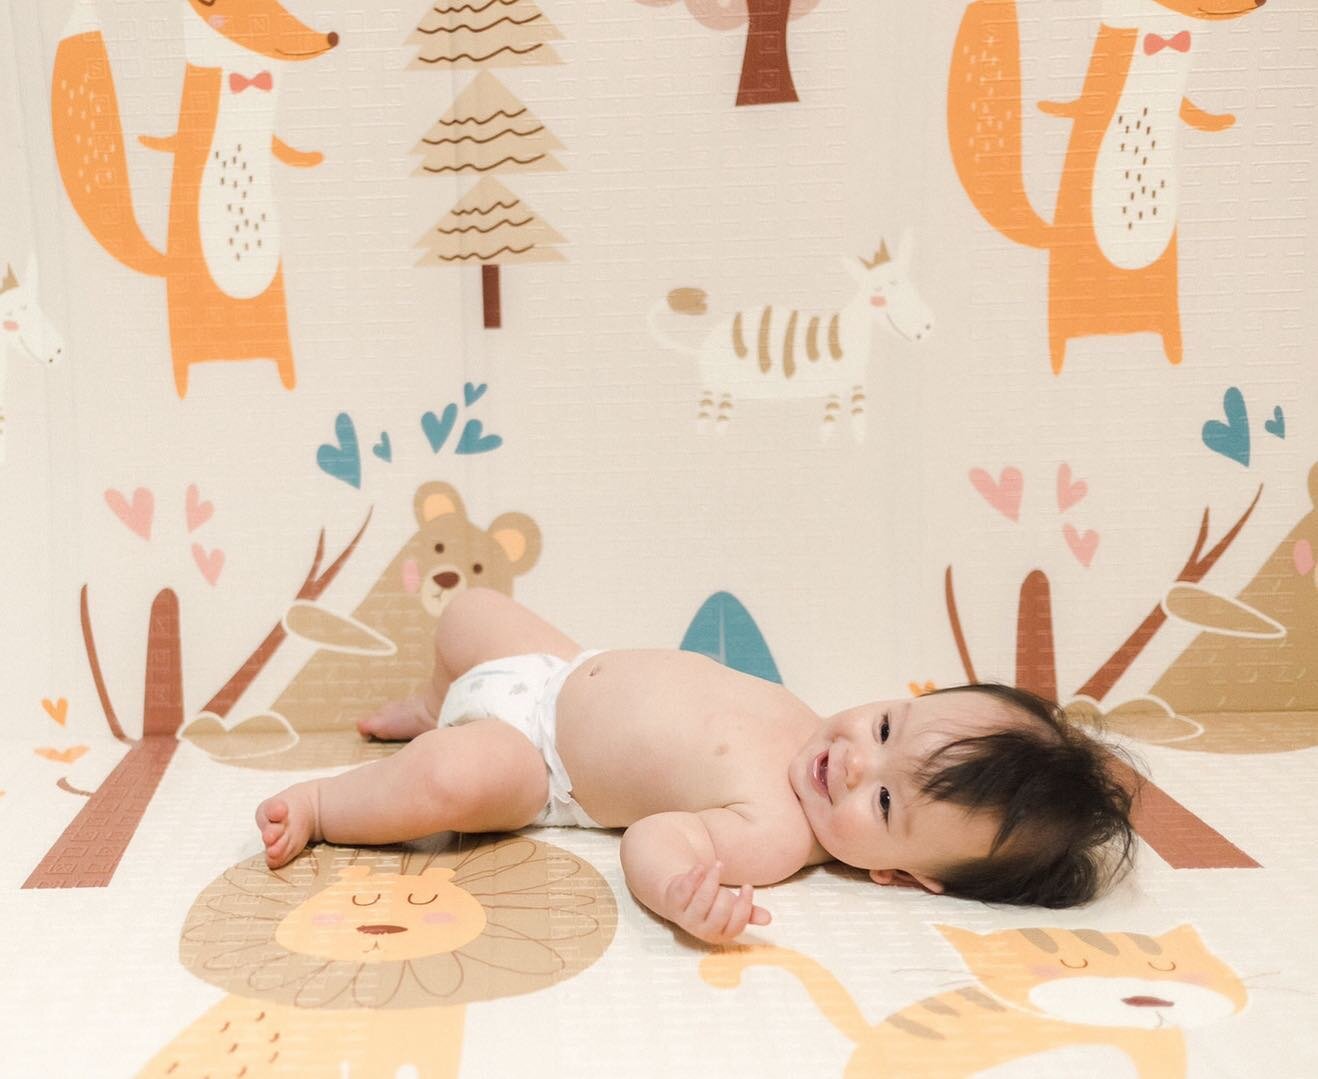 ☀️☀️☀️
Missing this little munchkin!

I also love how the play-mat made such a perfect backdrop heh.